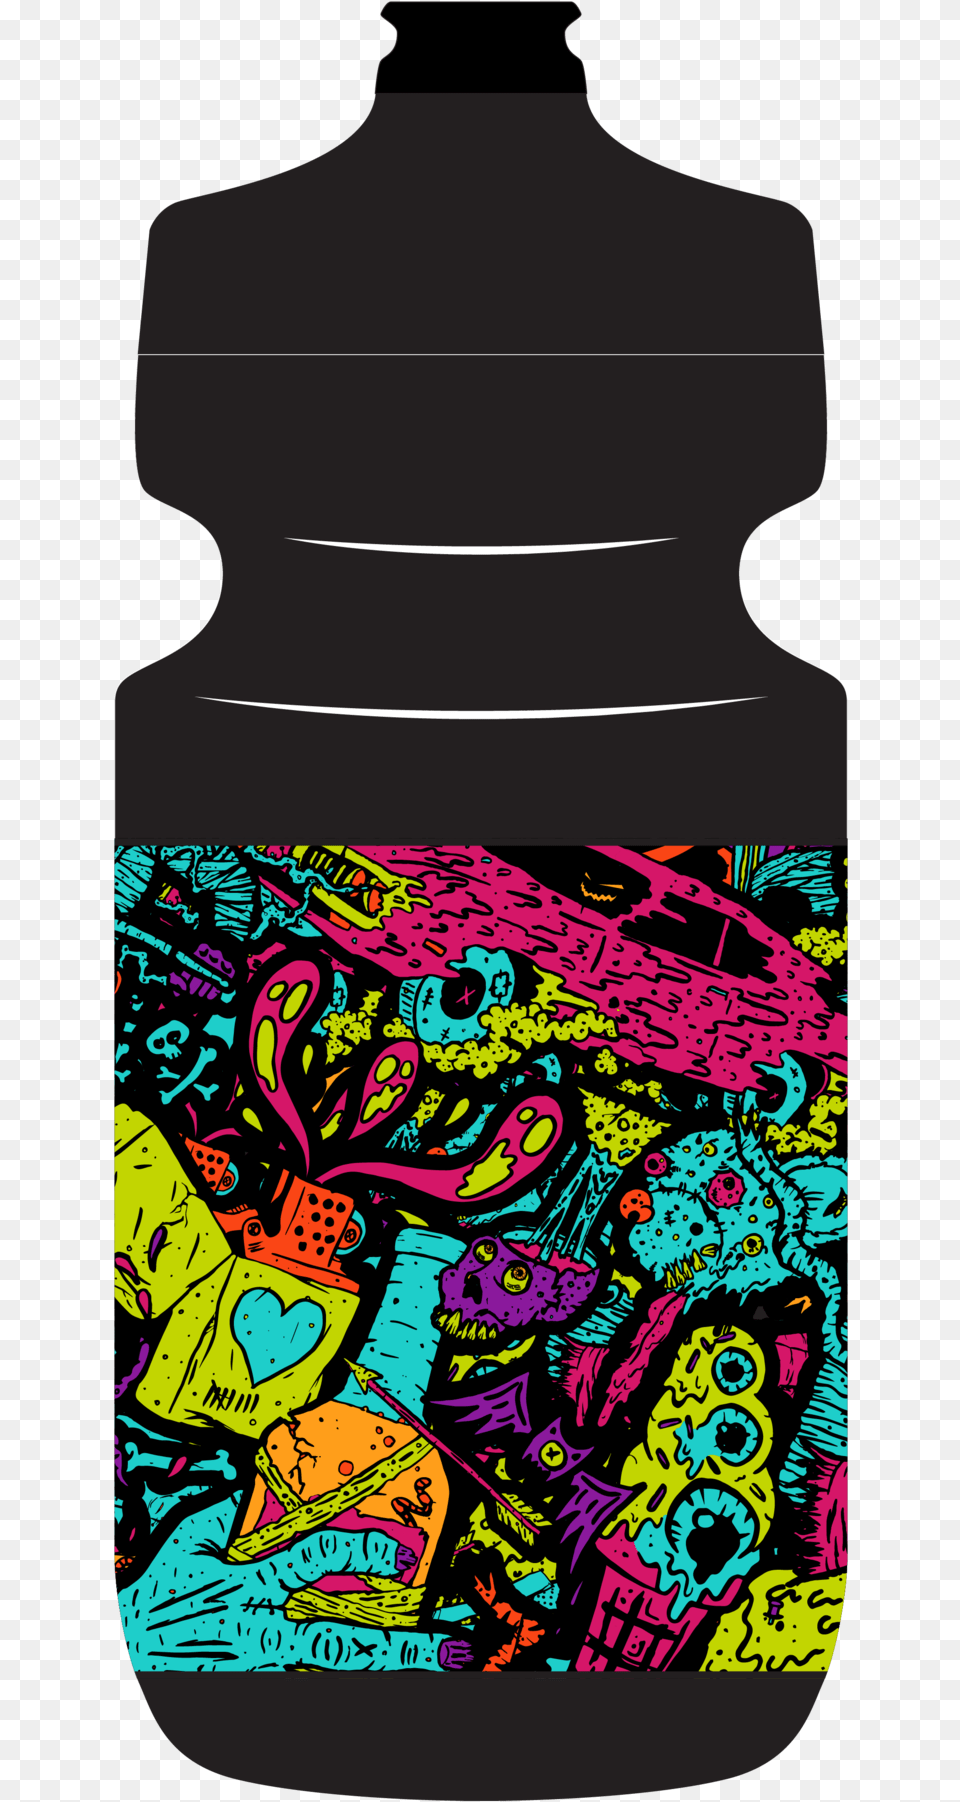 Monster Paradise Bottleclass Lazyload Lazyload Fade Water Bottle, Jar, Water Bottle, Ink Bottle, Art Free Png